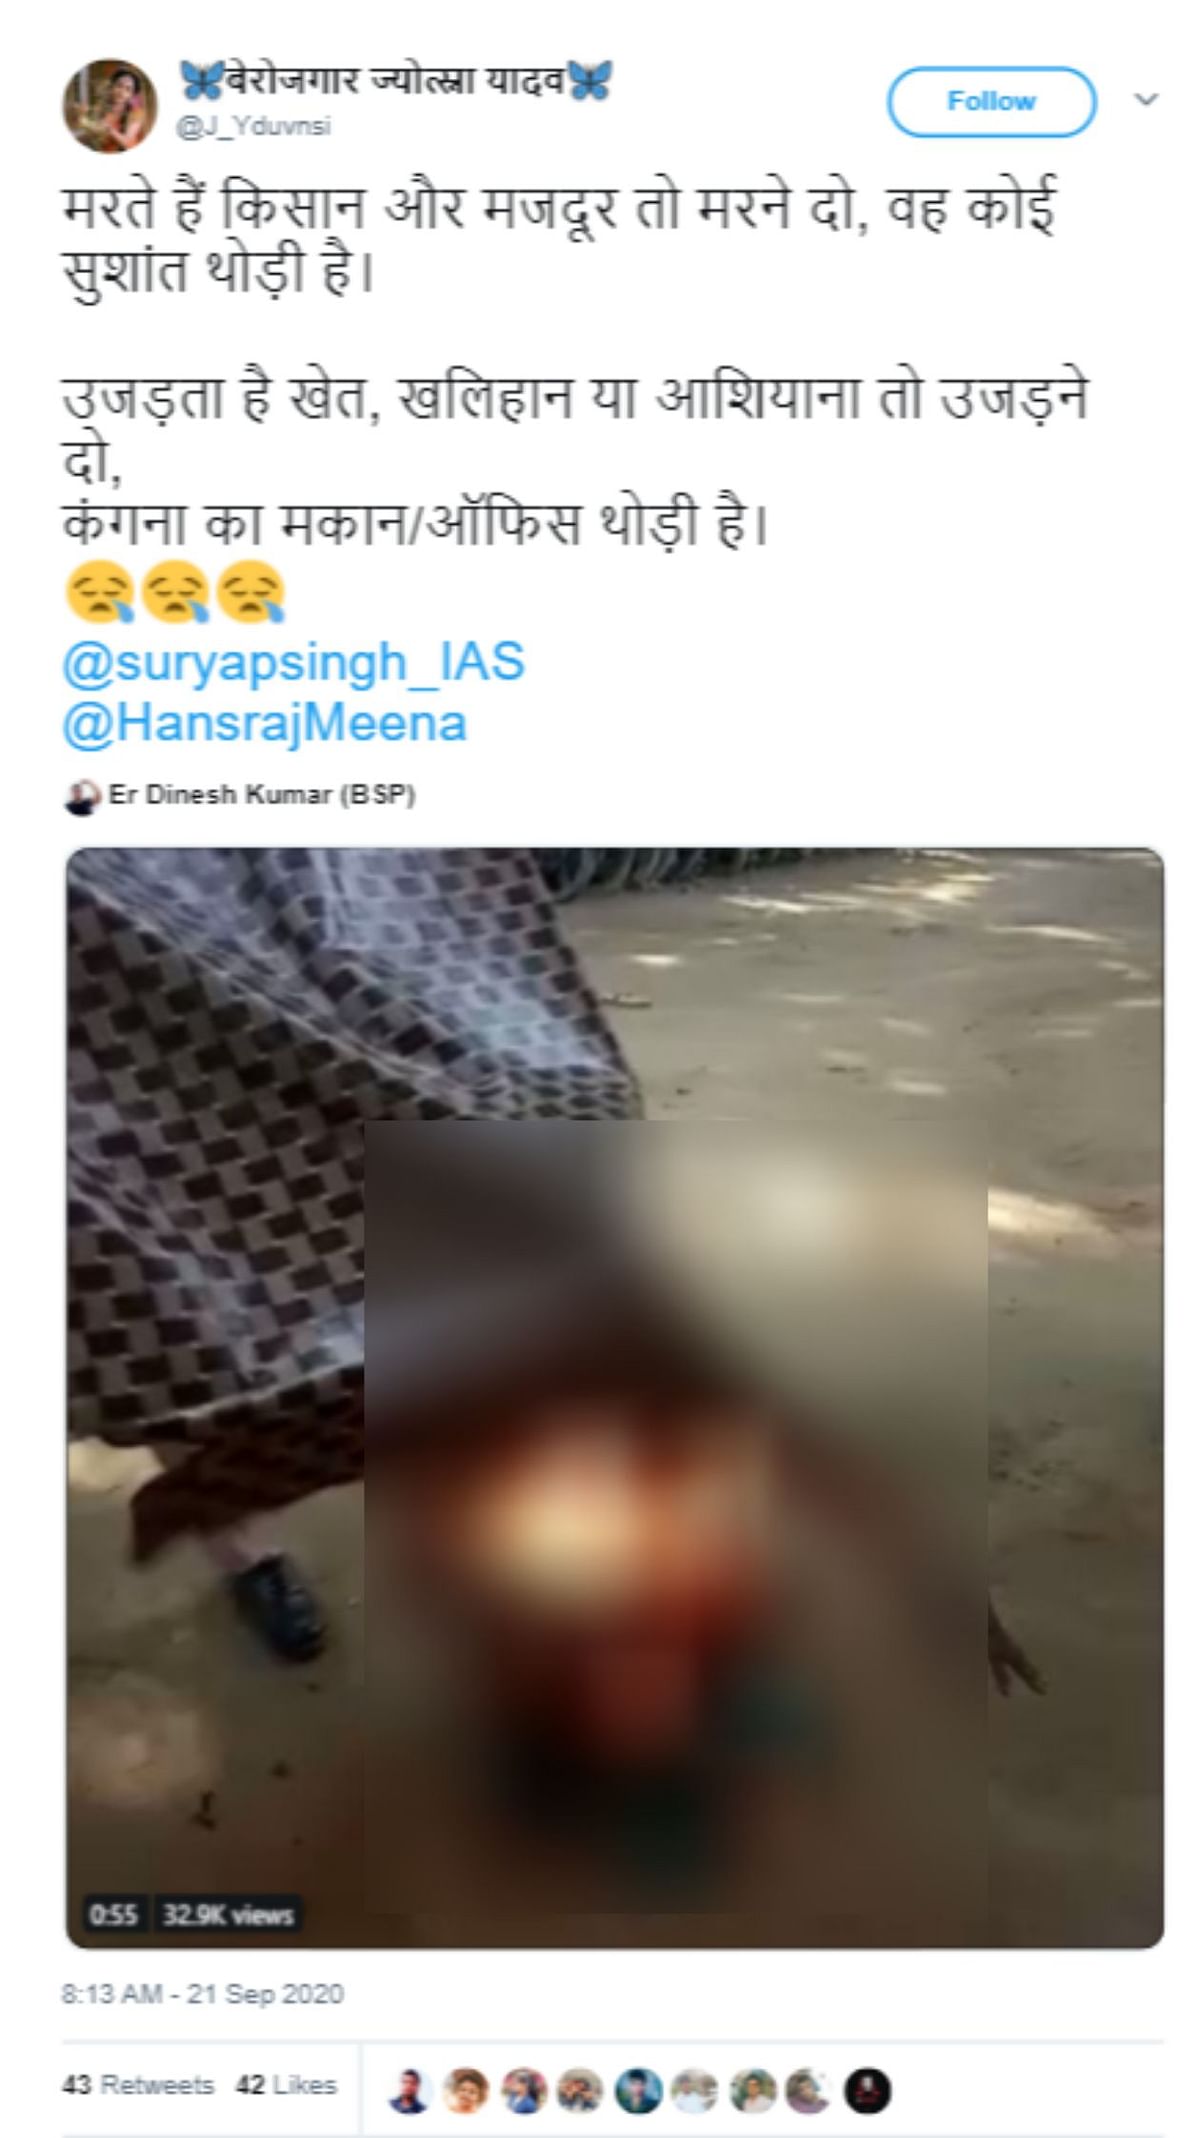 The video is actually from 2019, when a couple from UP’s Mathura had self-immolated to protest police inaction.